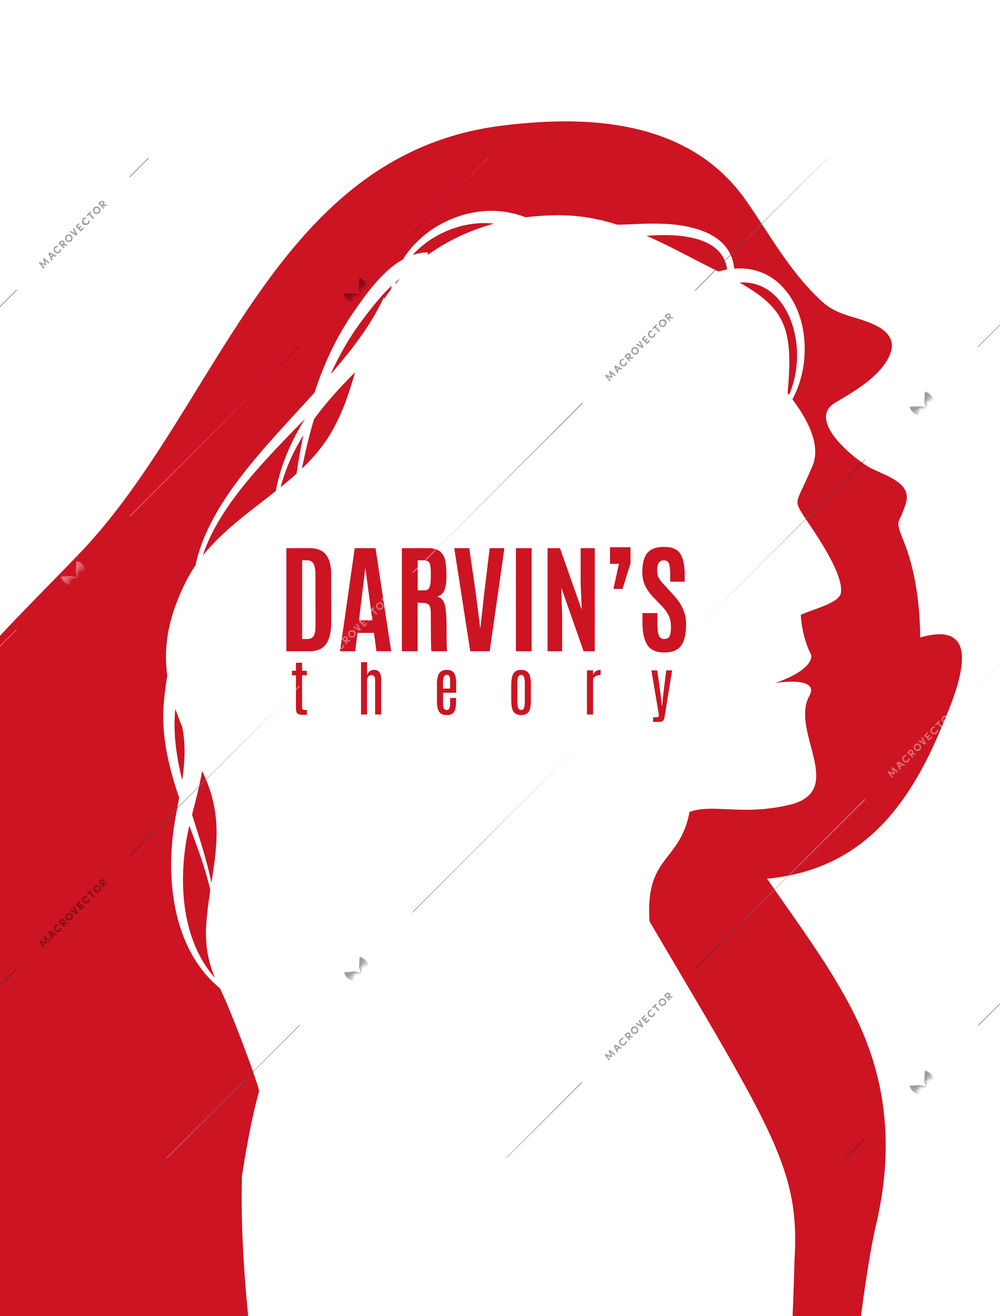 Darwin theory red white poster with profile silhouettes of primate and modern man vector illustration